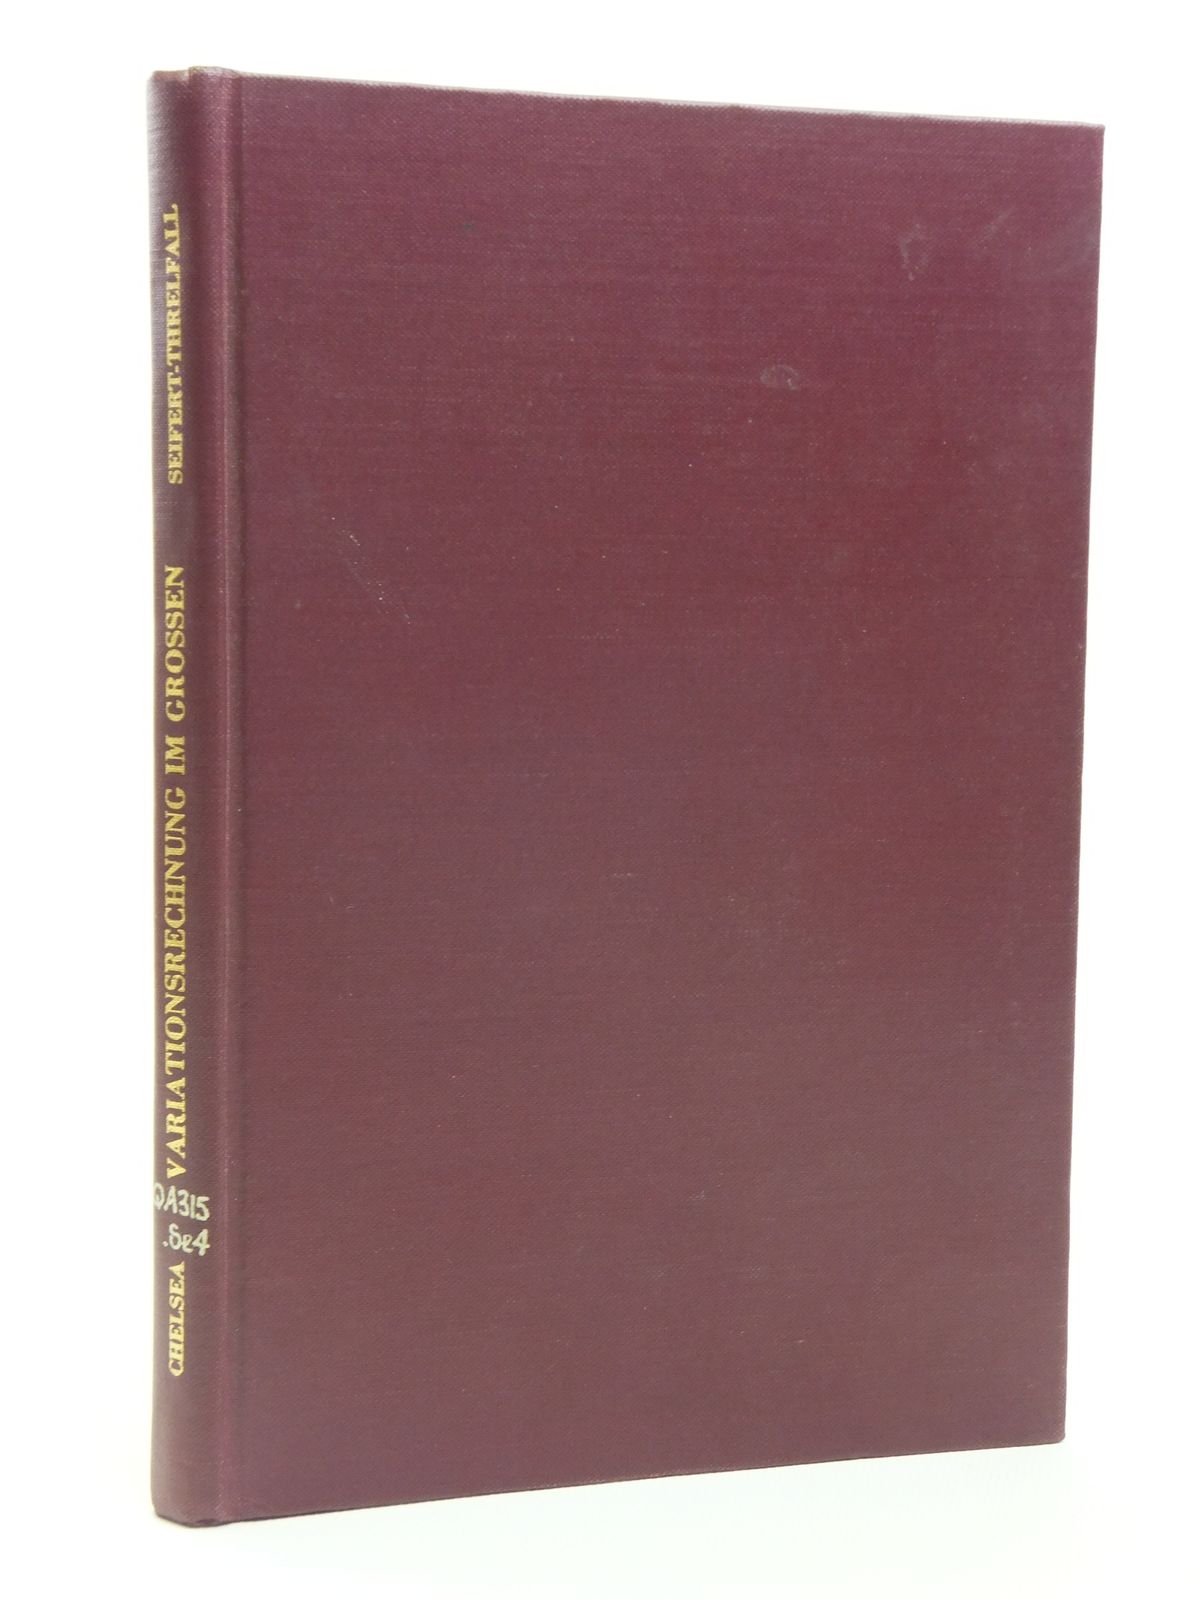 Photo of VARIATIONSRECHNUNG IM GROSSEN written by Seifert, H. Threlfall, W. published by Chelsea Publishing Co. (STOCK CODE: 2120728)  for sale by Stella & Rose's Books